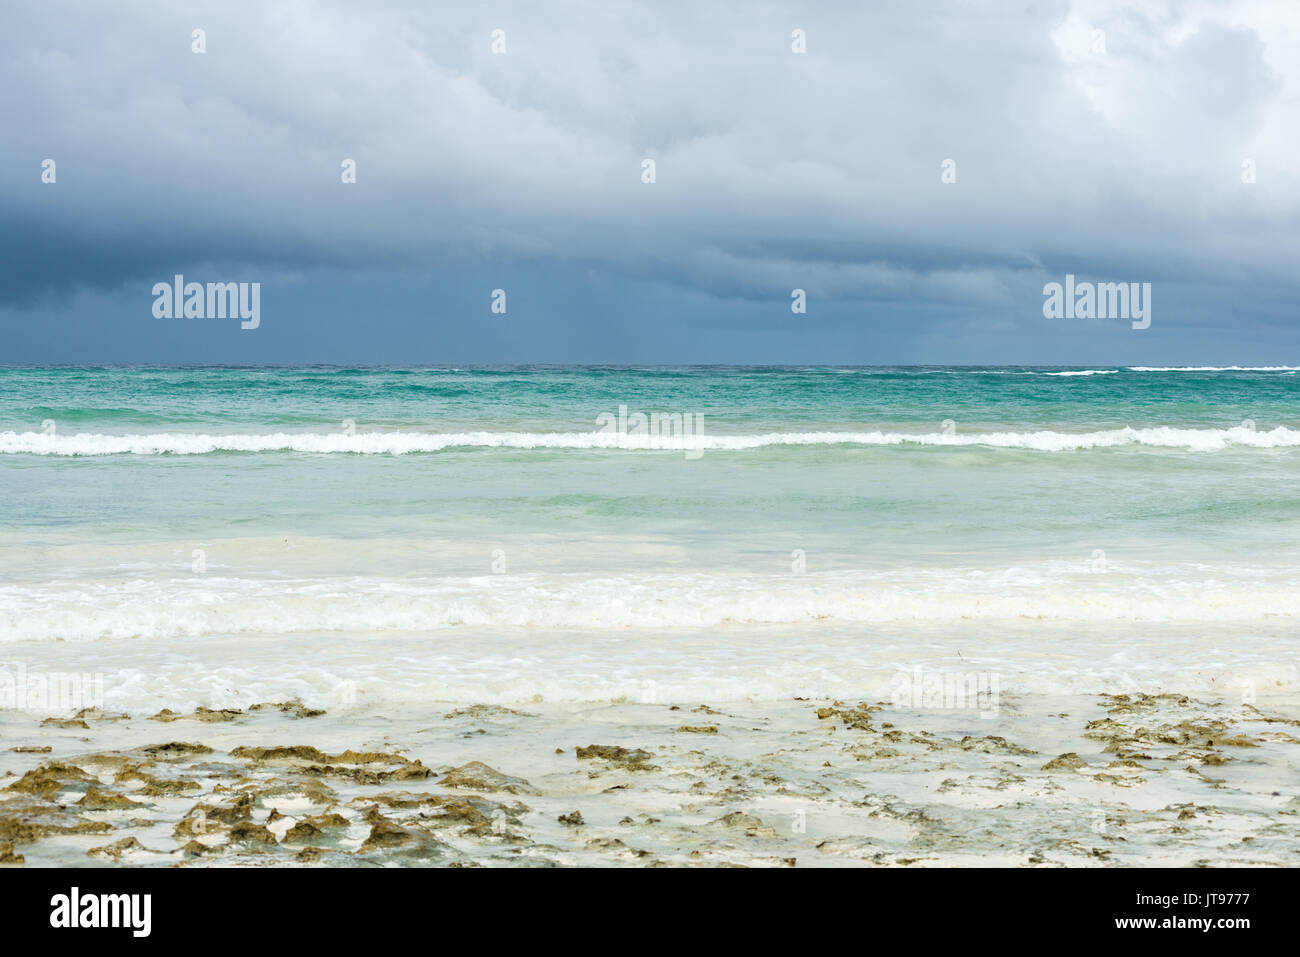 Rain cloud on horizon with Indian ocean and shoreline beach in foreground, Diani, Kenya Stock Photo